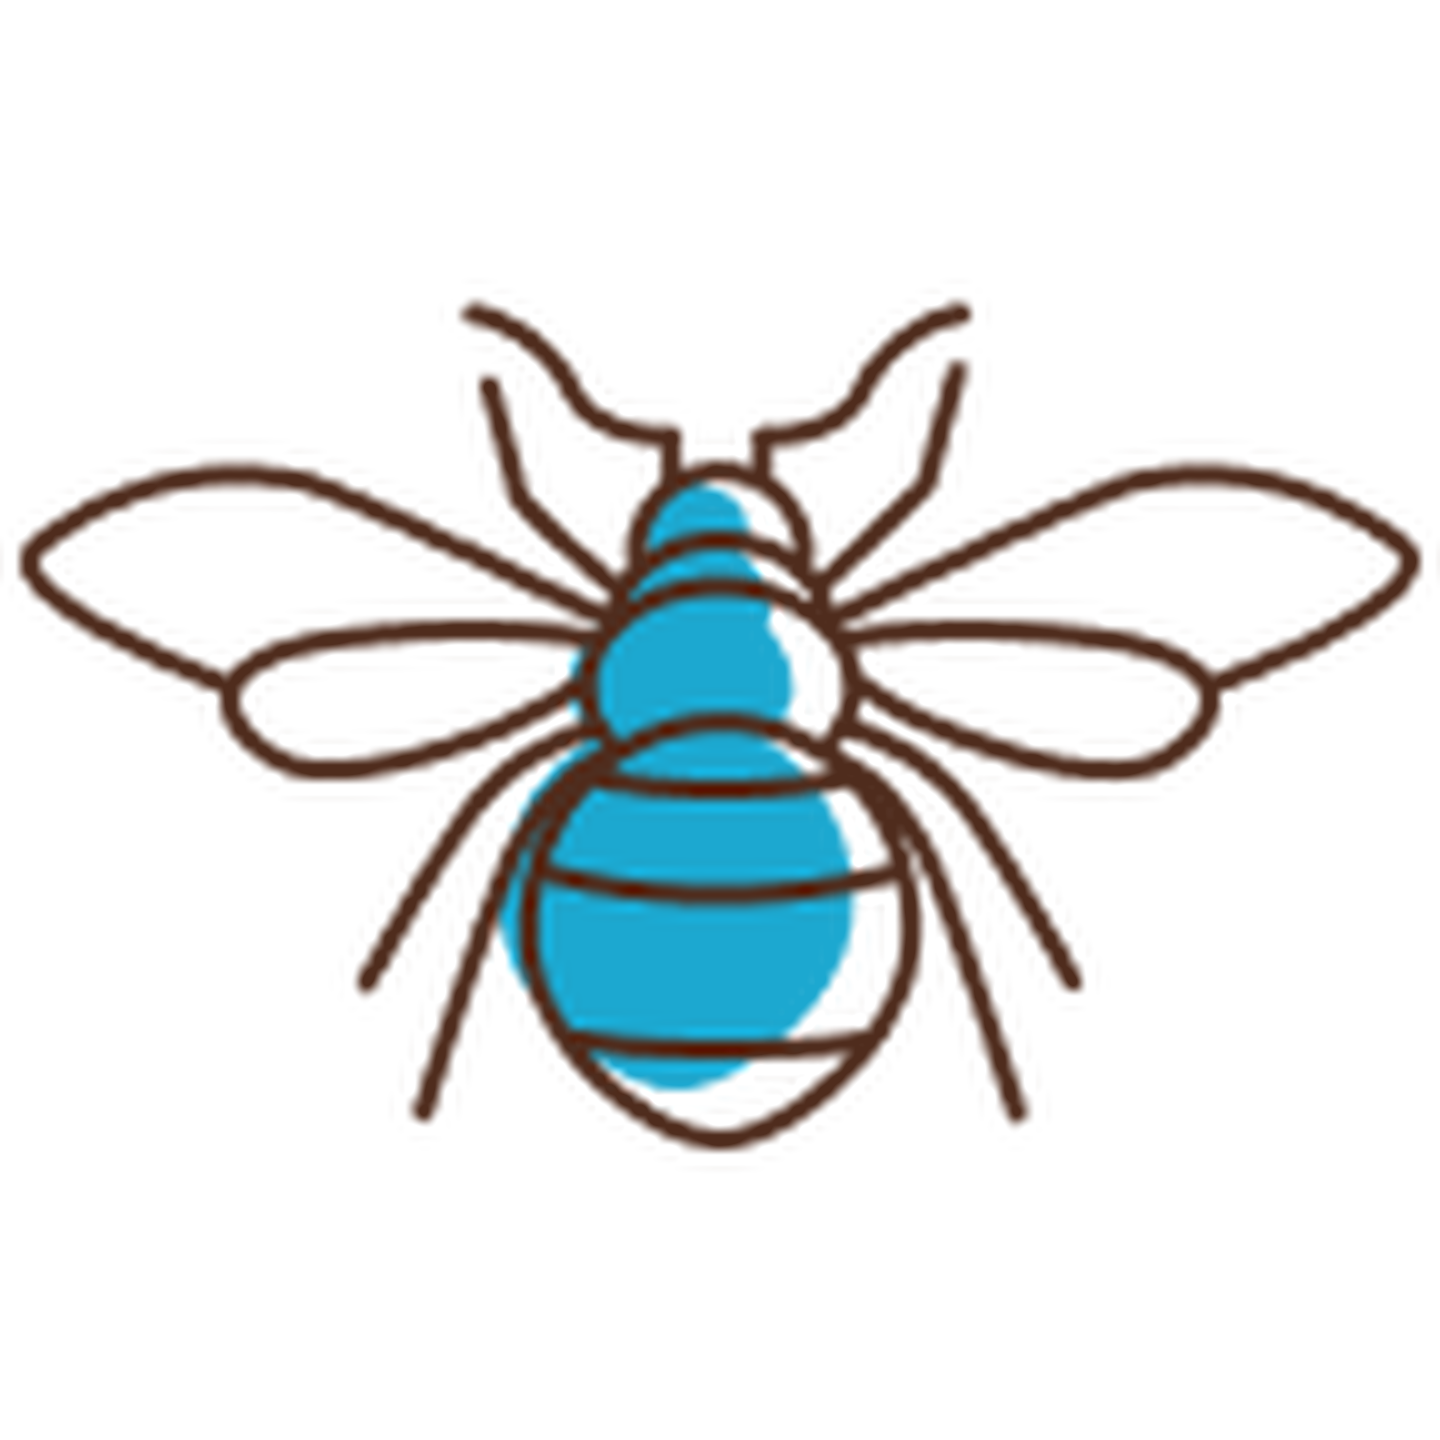 illustration of a bee